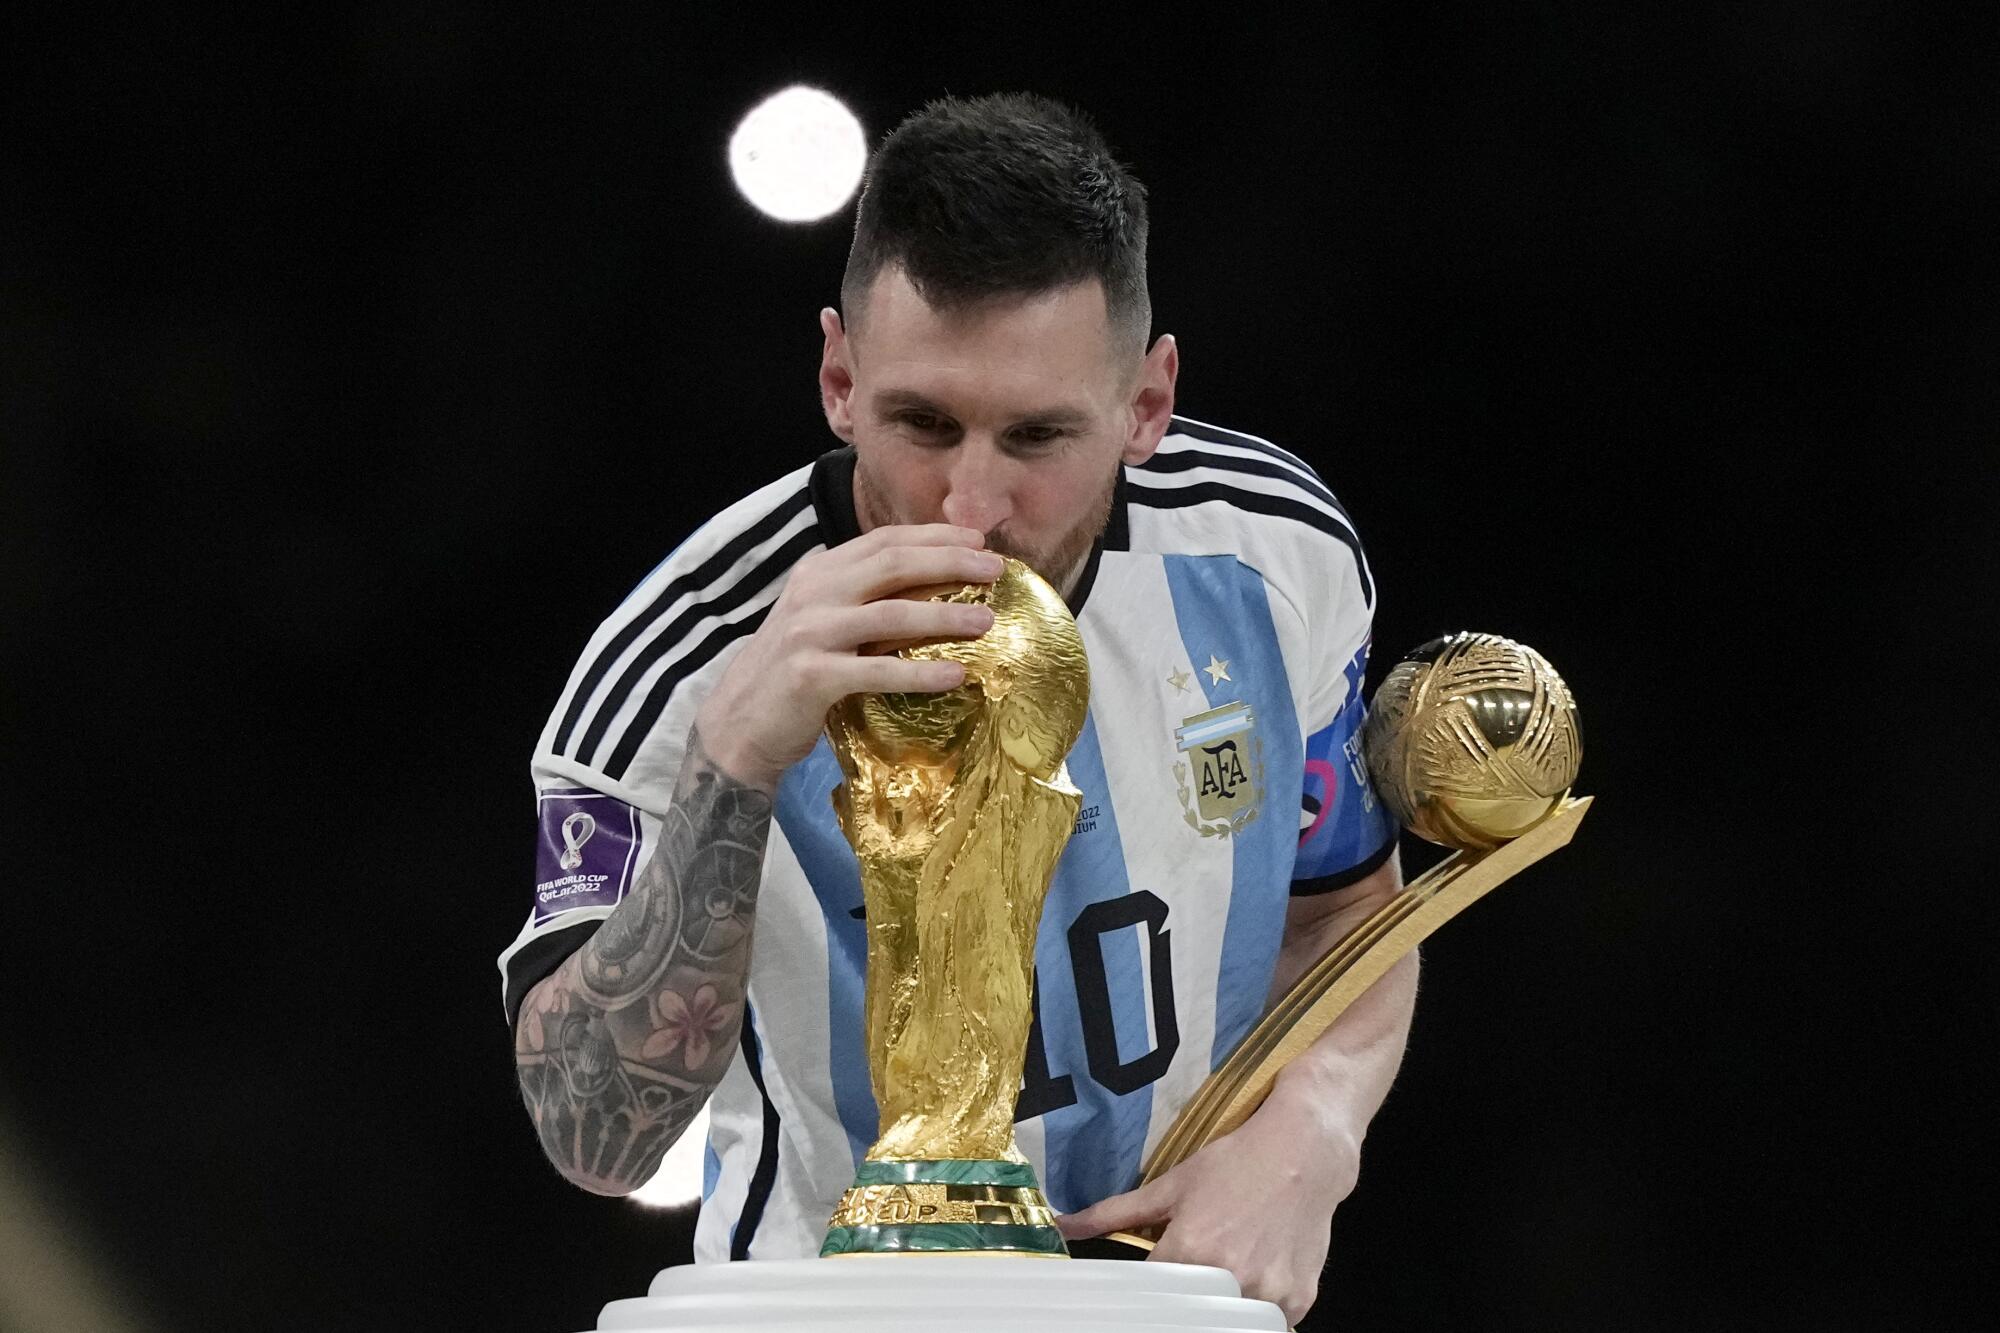 Lionel Messi kisses the World Cup trophy after Argentina's victory over France in the Qatar World Cup final.